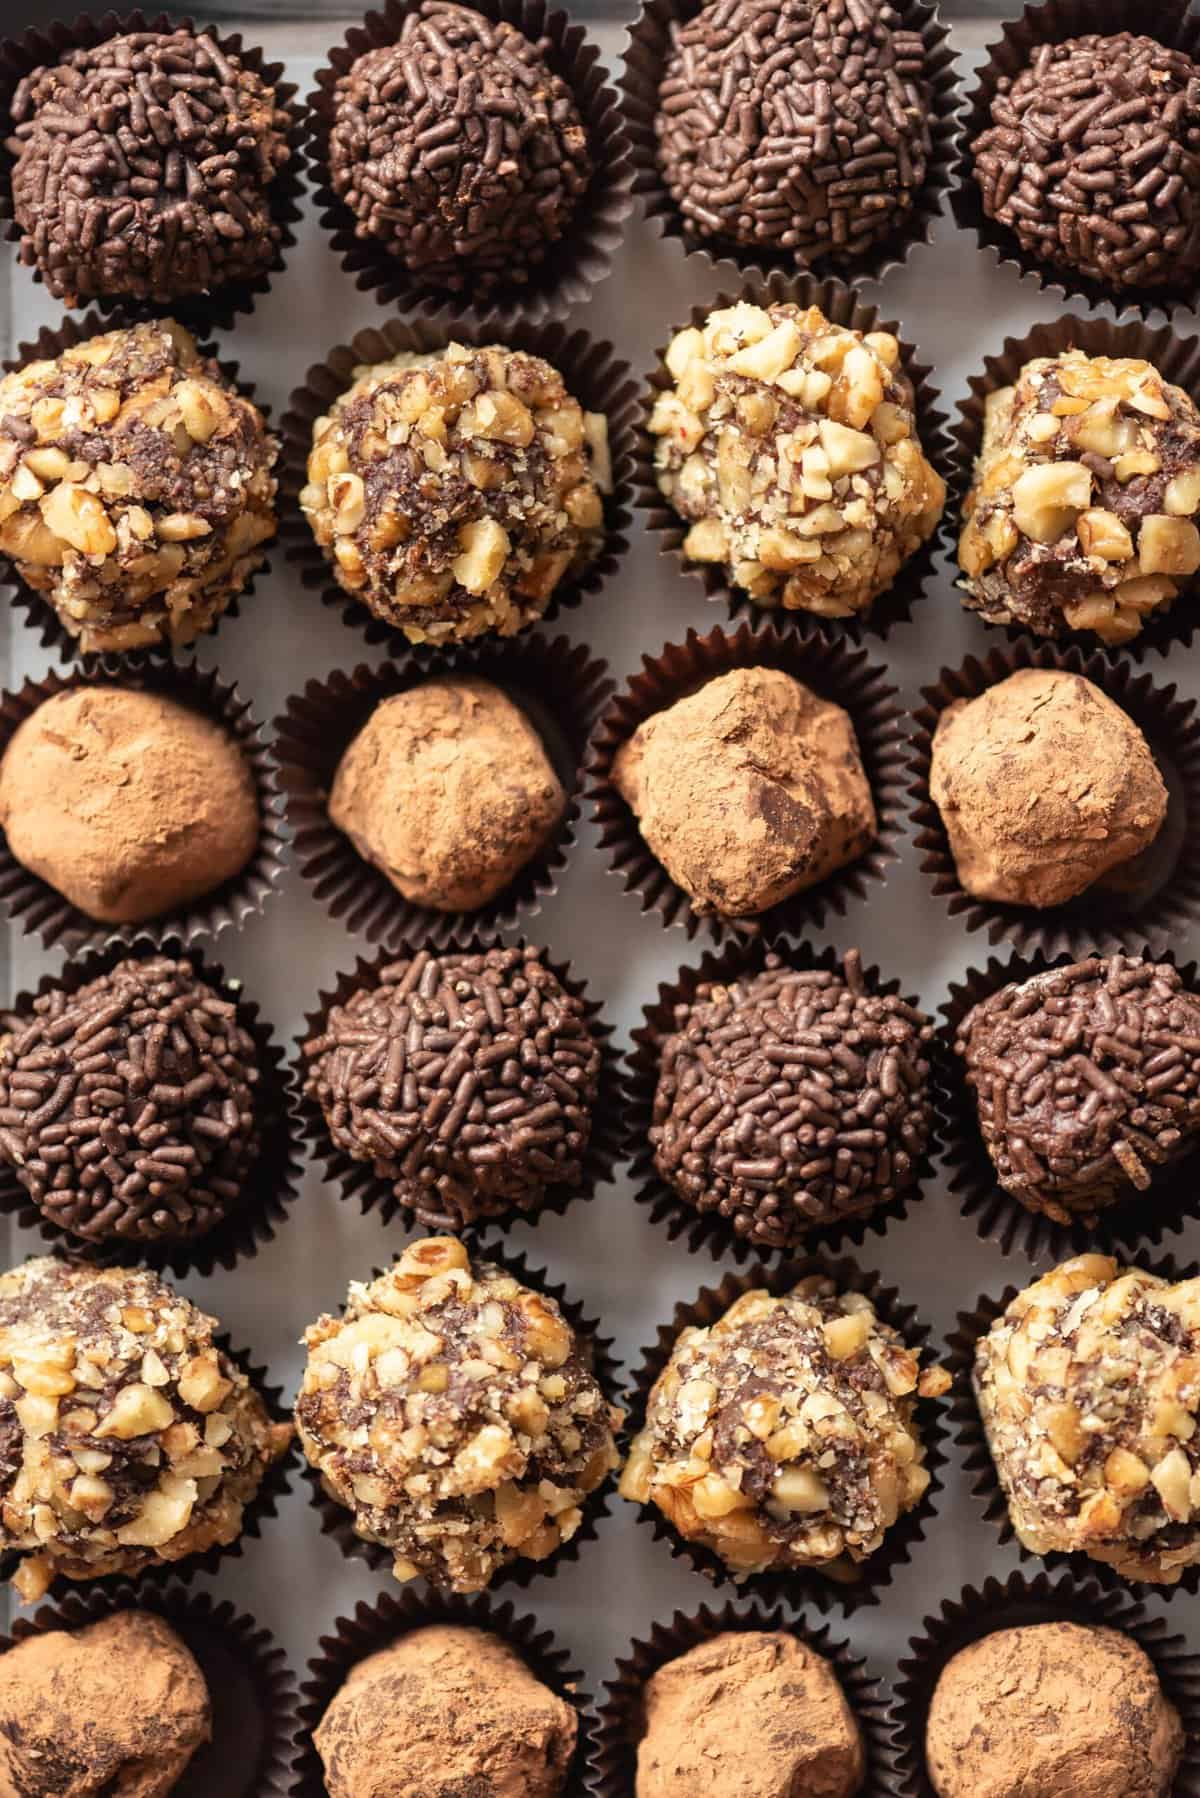 Rows of chocolate truffles coated in chopped walnuts, cocoa powder, and chocolate sprinkles.